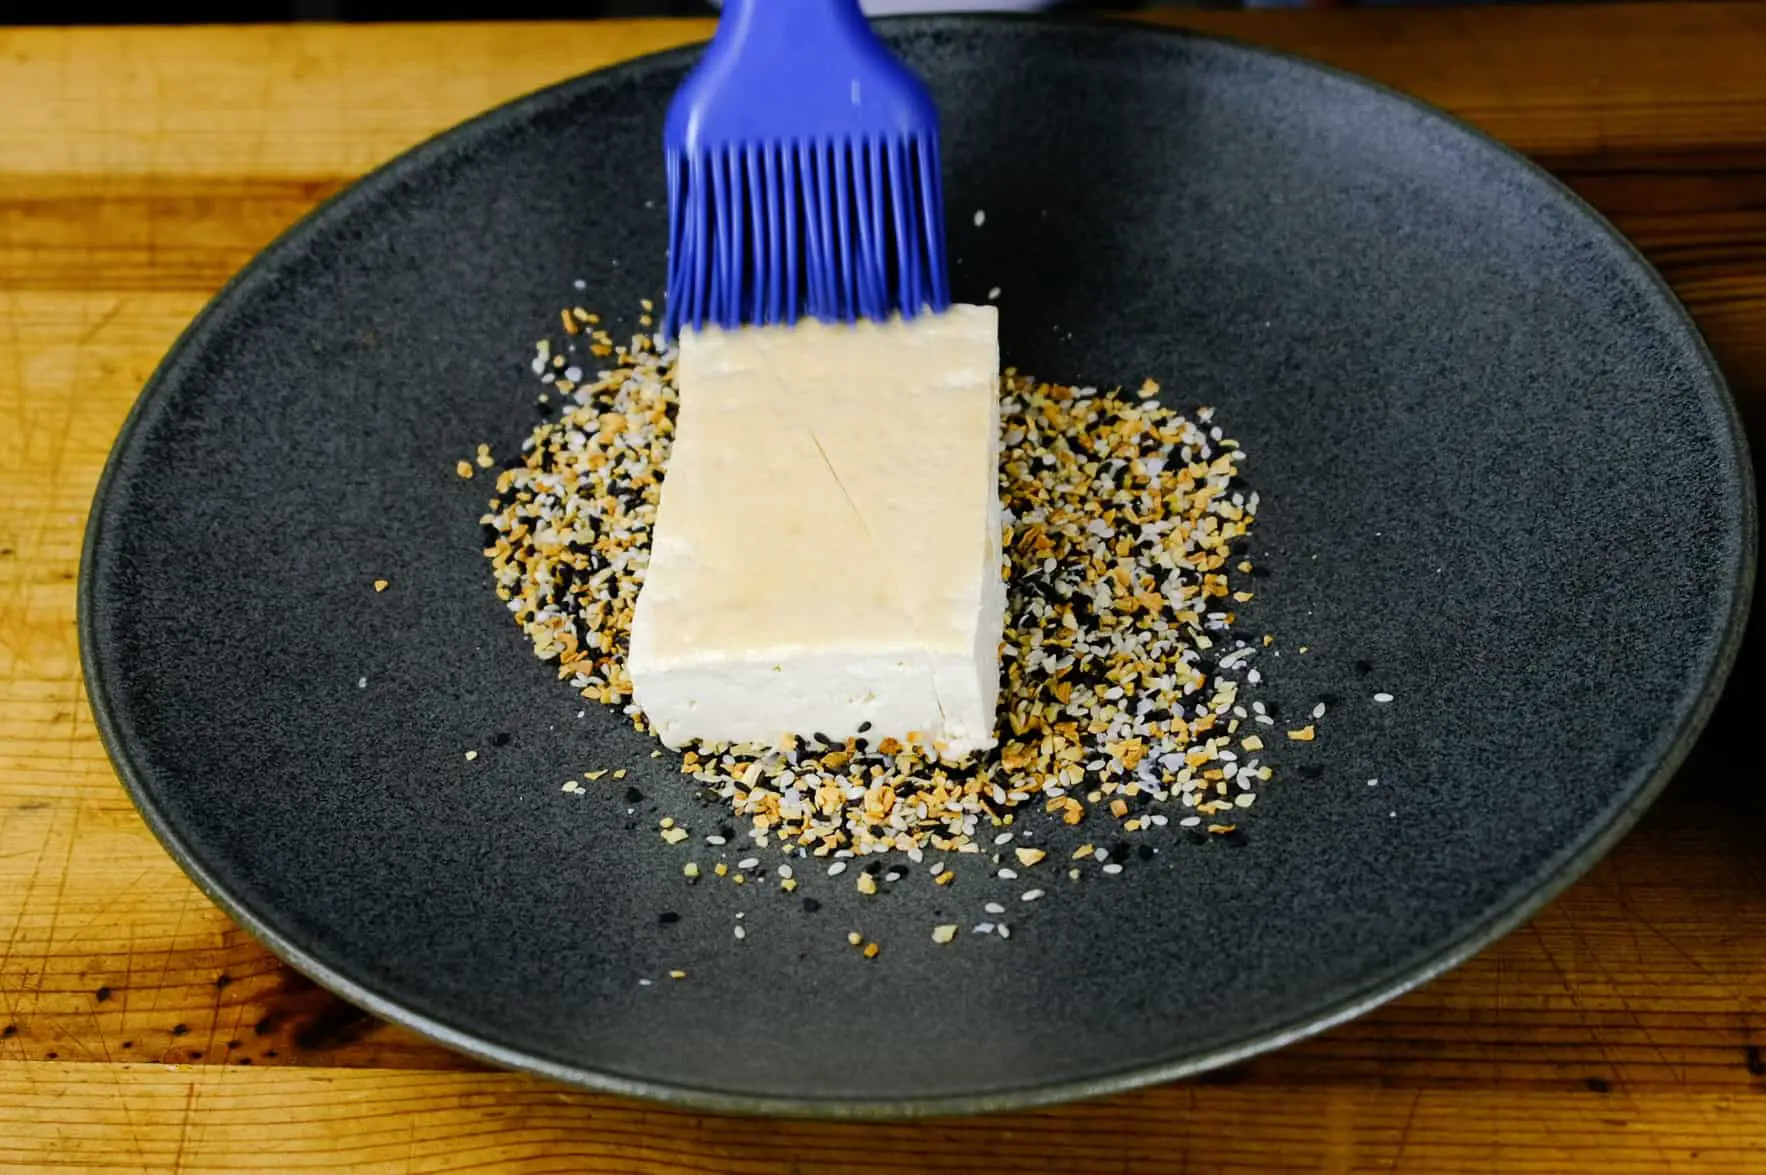 BRUSHING SESAME OIL ON OTHER SIDE OF TOFU